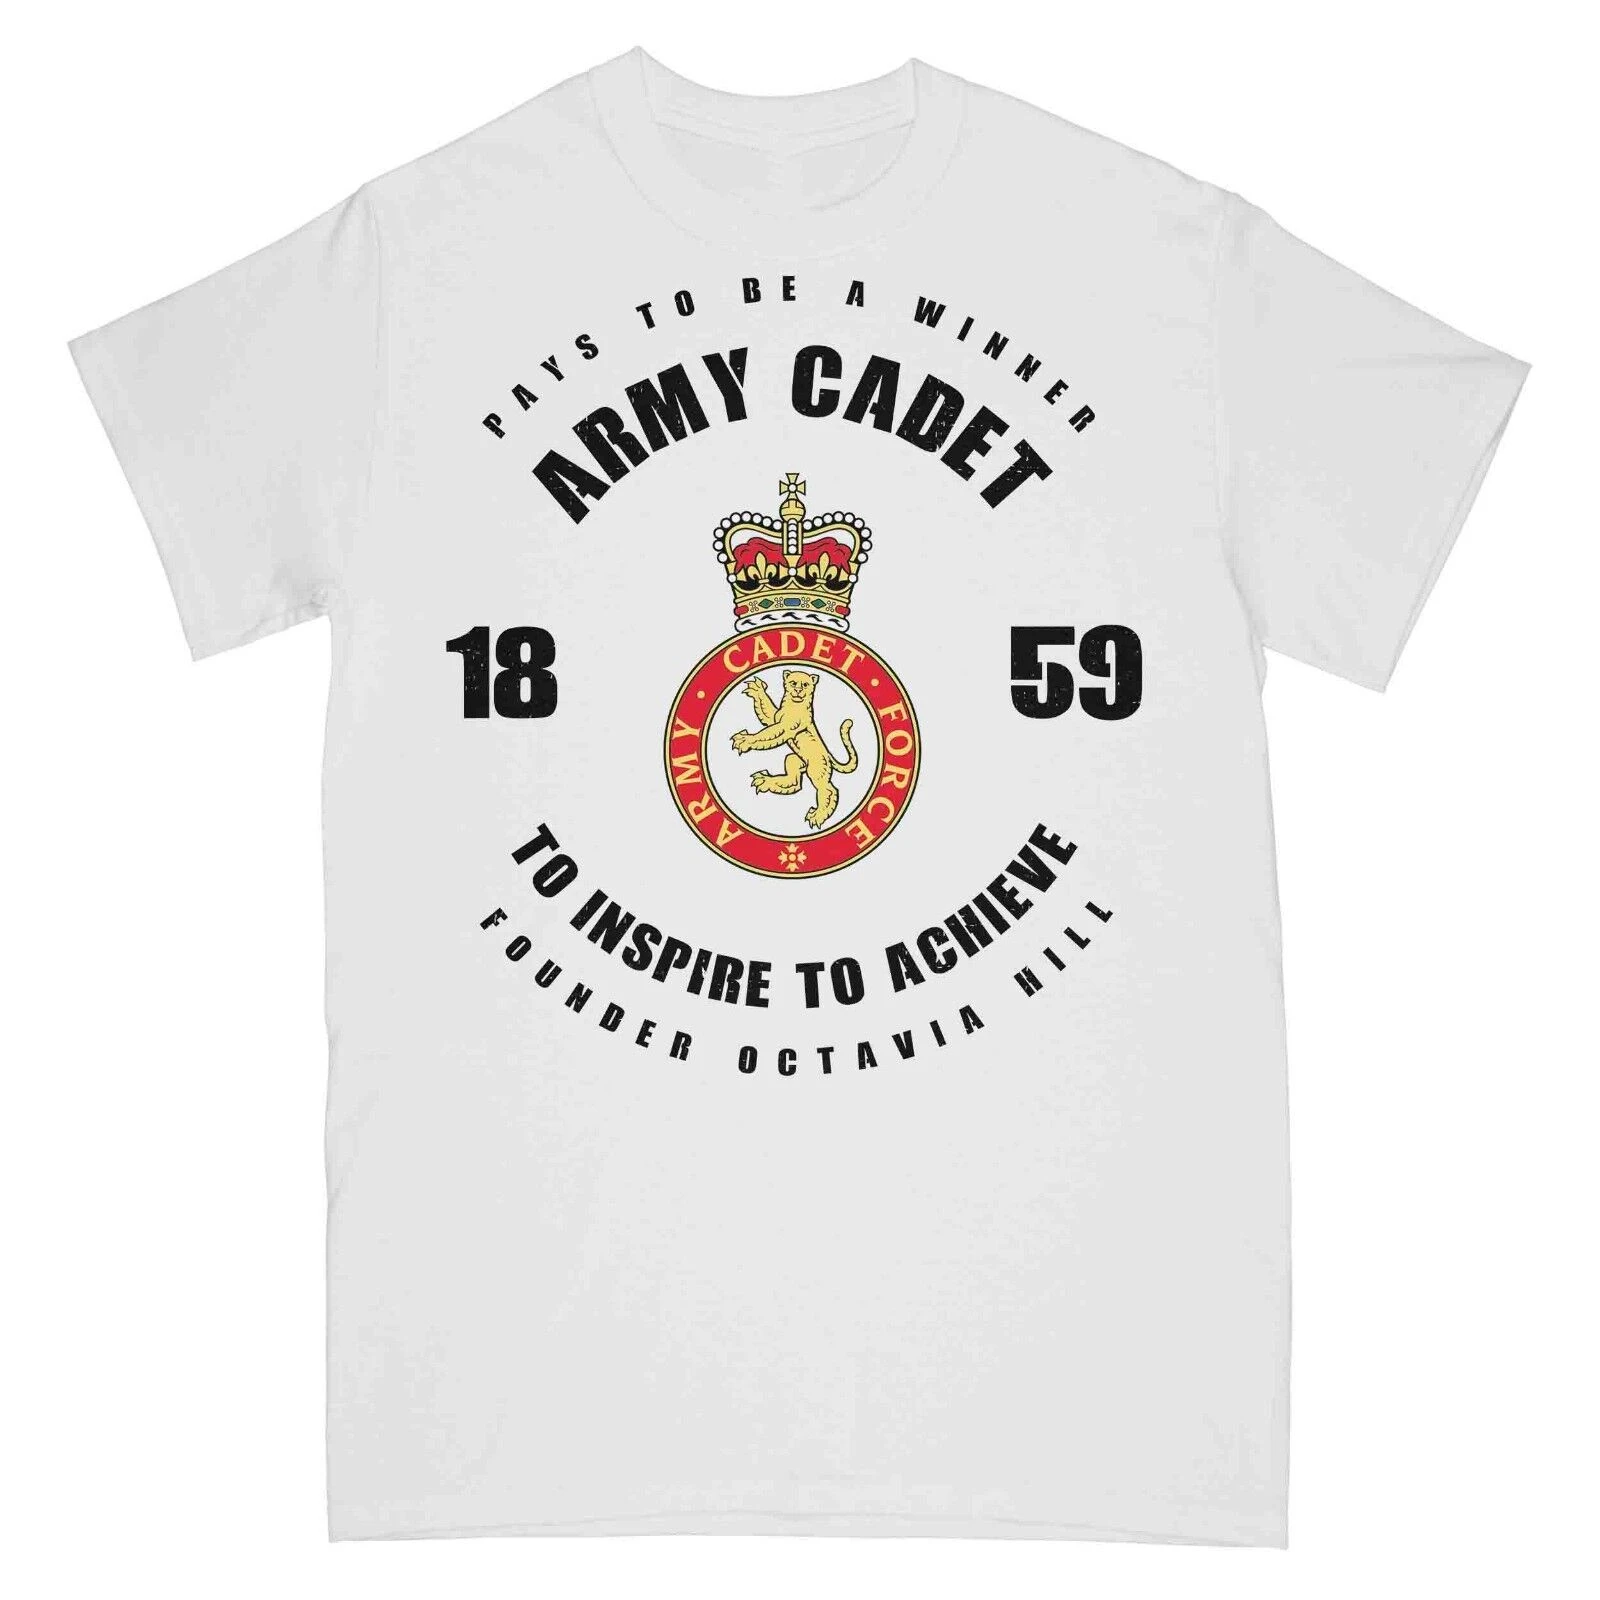 

Pays To Be A Winner Army Cadet Force Printed Men's Printed T-Shirt Premium Cotton Short Sleeve O-Neck Mens Tshirt S-3XL